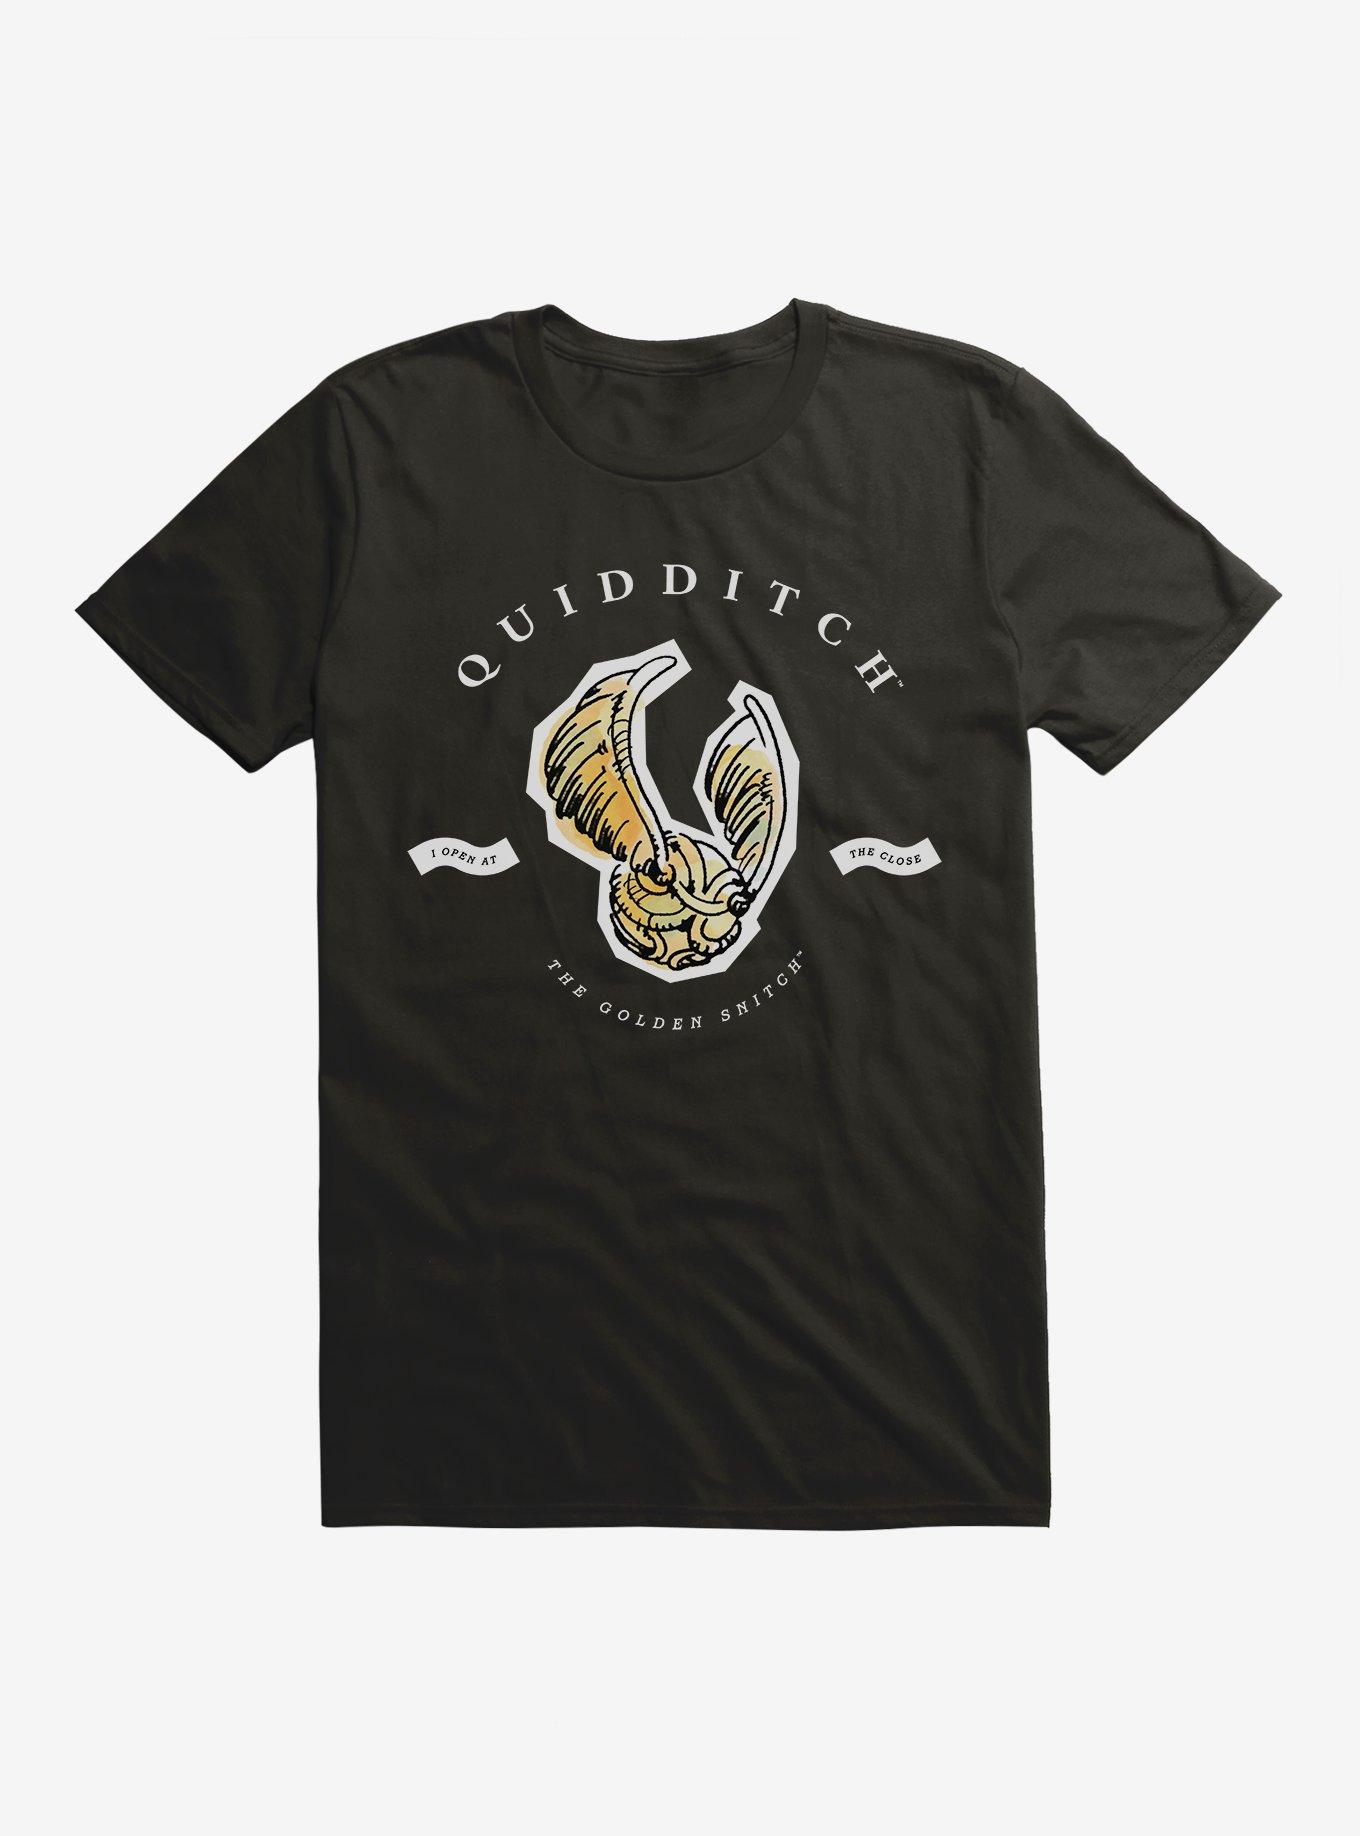 Harry Potter Watercolor Quidditch Golden Snitch T-Shirt